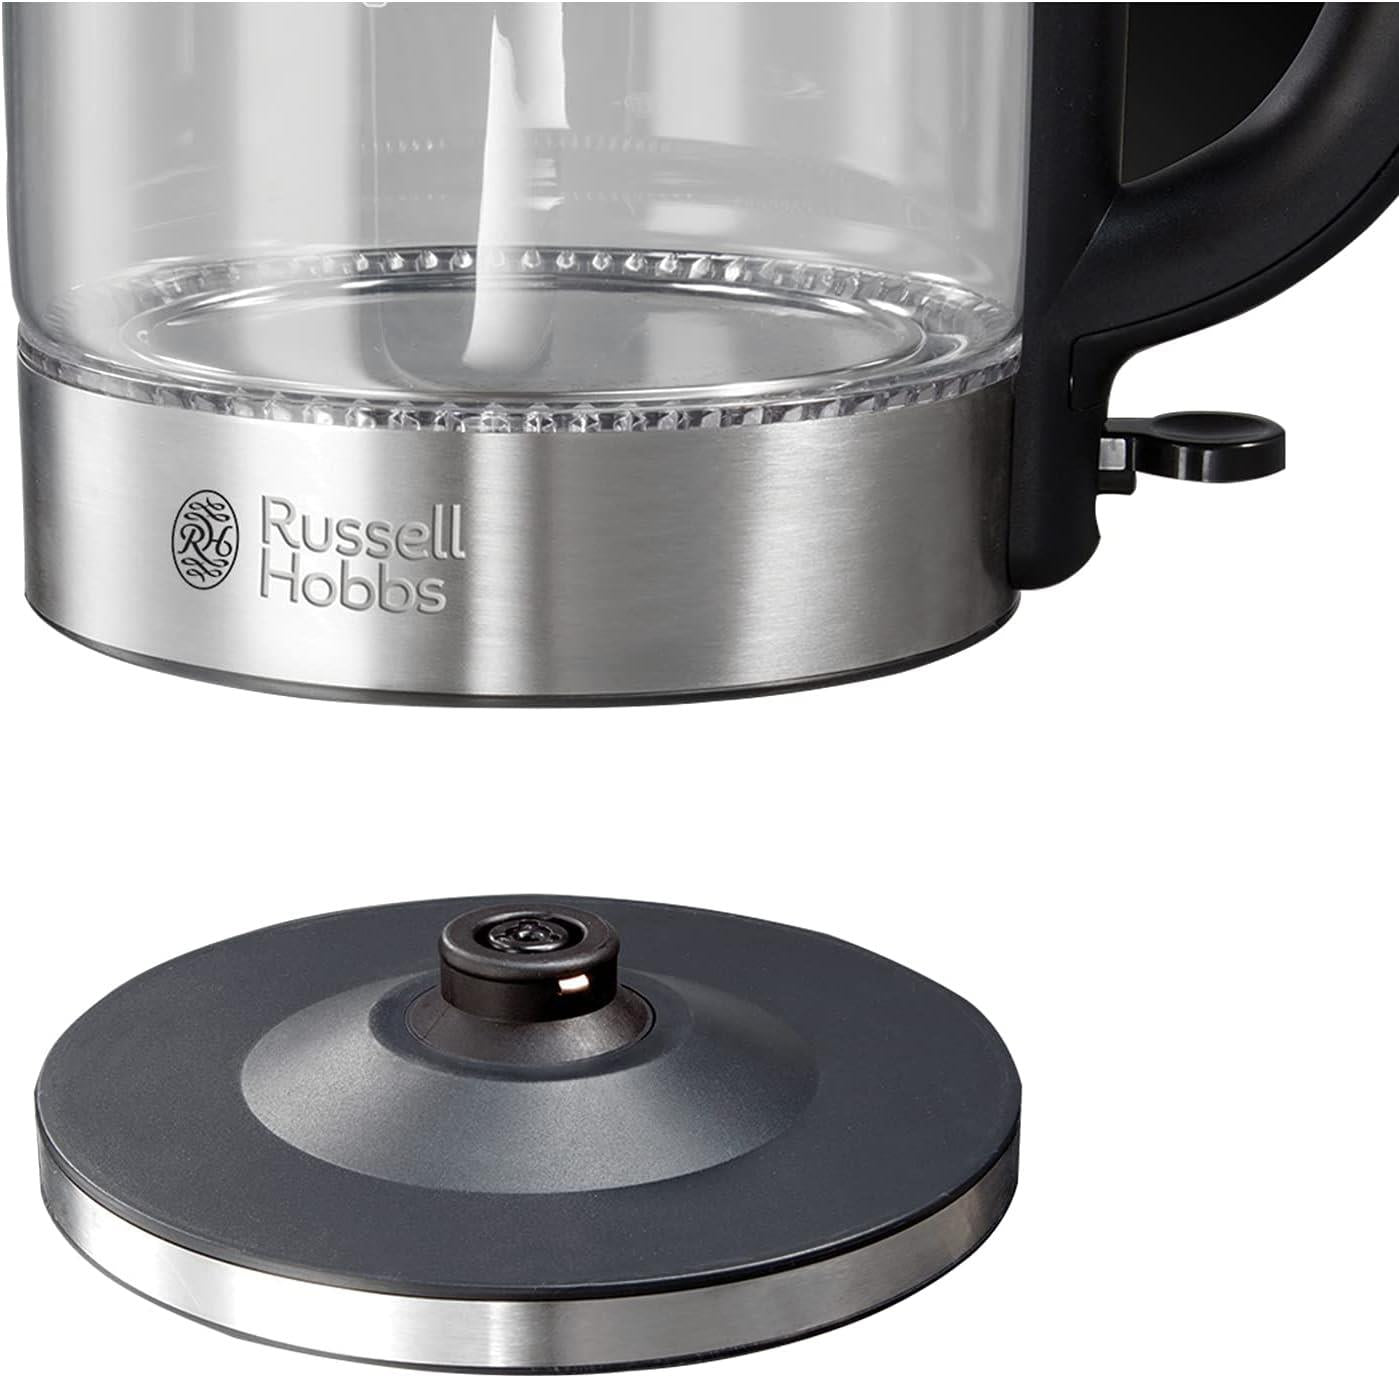 Russell Hobbs 1.7L Brushed Stainless Steel Illuminating Glass Kettle